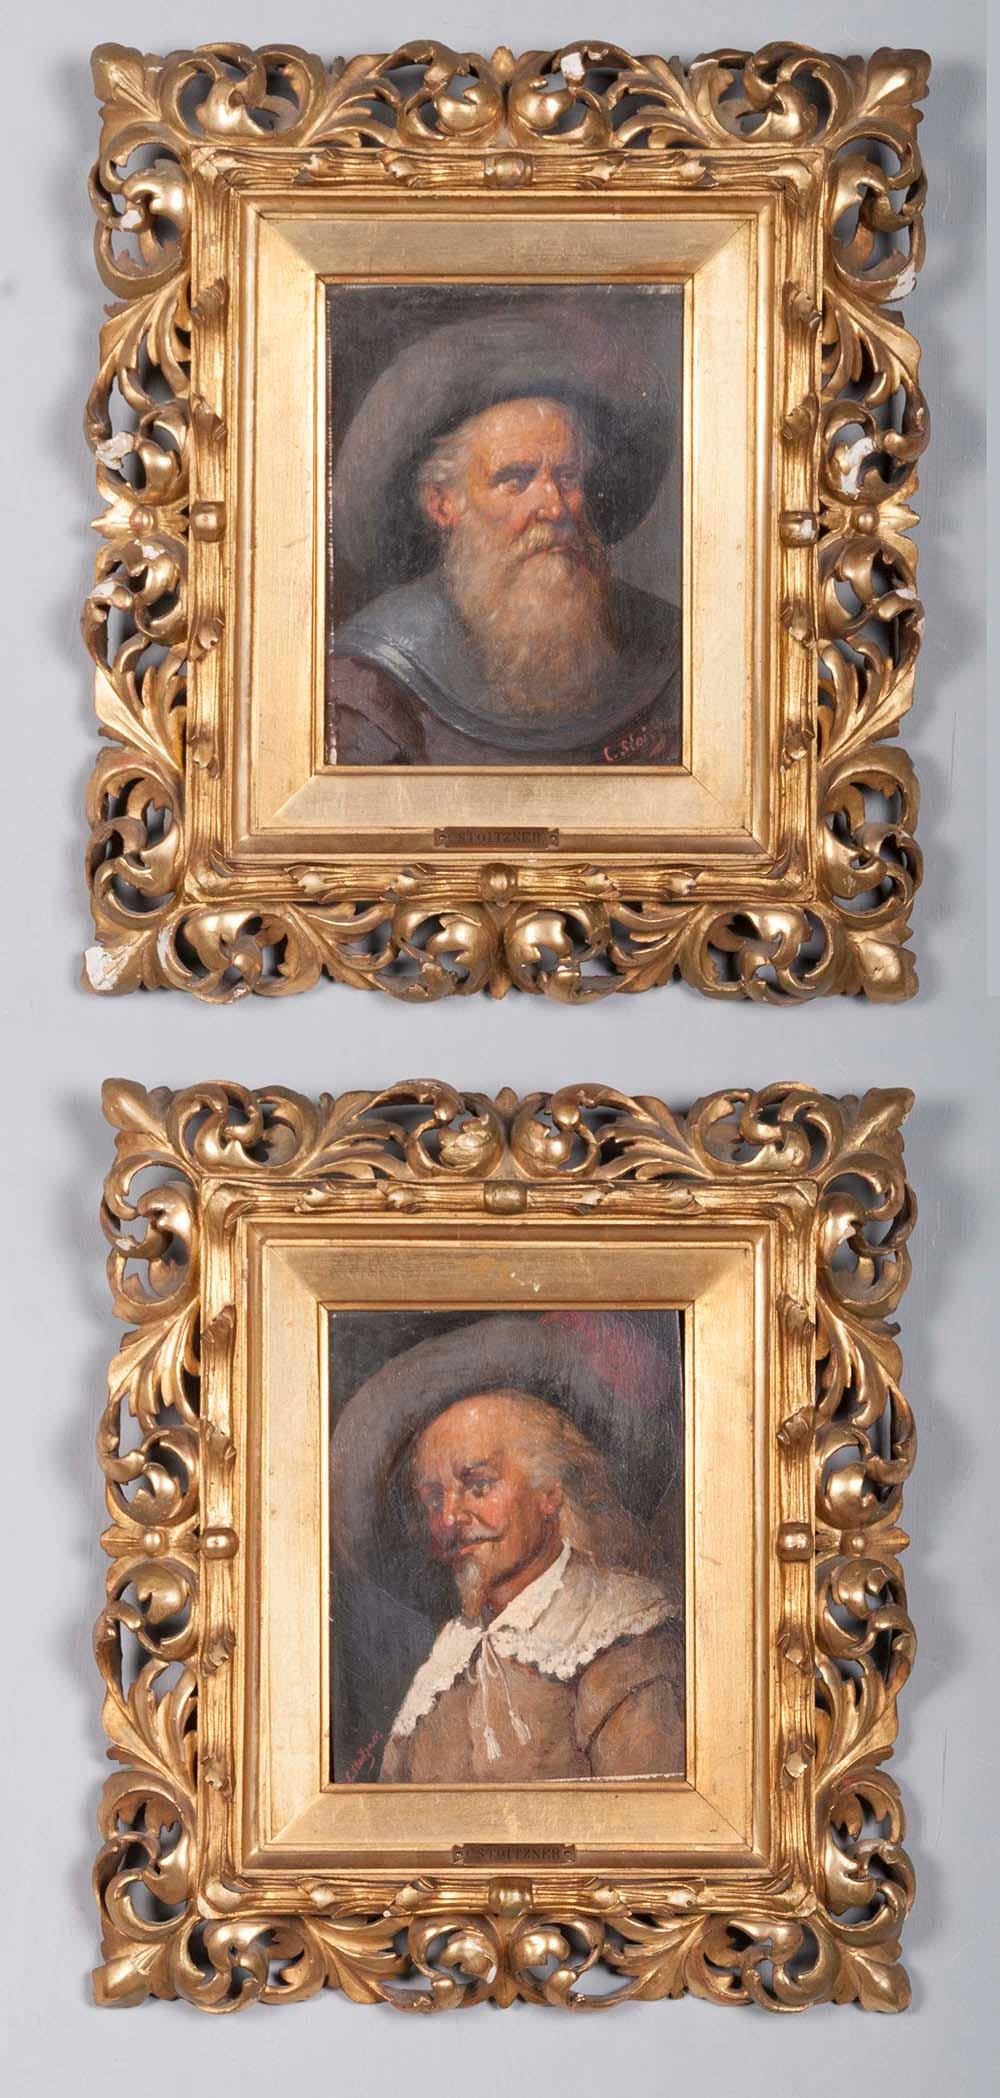 A couple of paintings, depicting two men dressed in the fashion of the Renaissance.
Oil paint on panel. The frames are carved and gilded with gold leaf. Here and there some small pieces of gold leaf are missing.

Below you will find more detailed